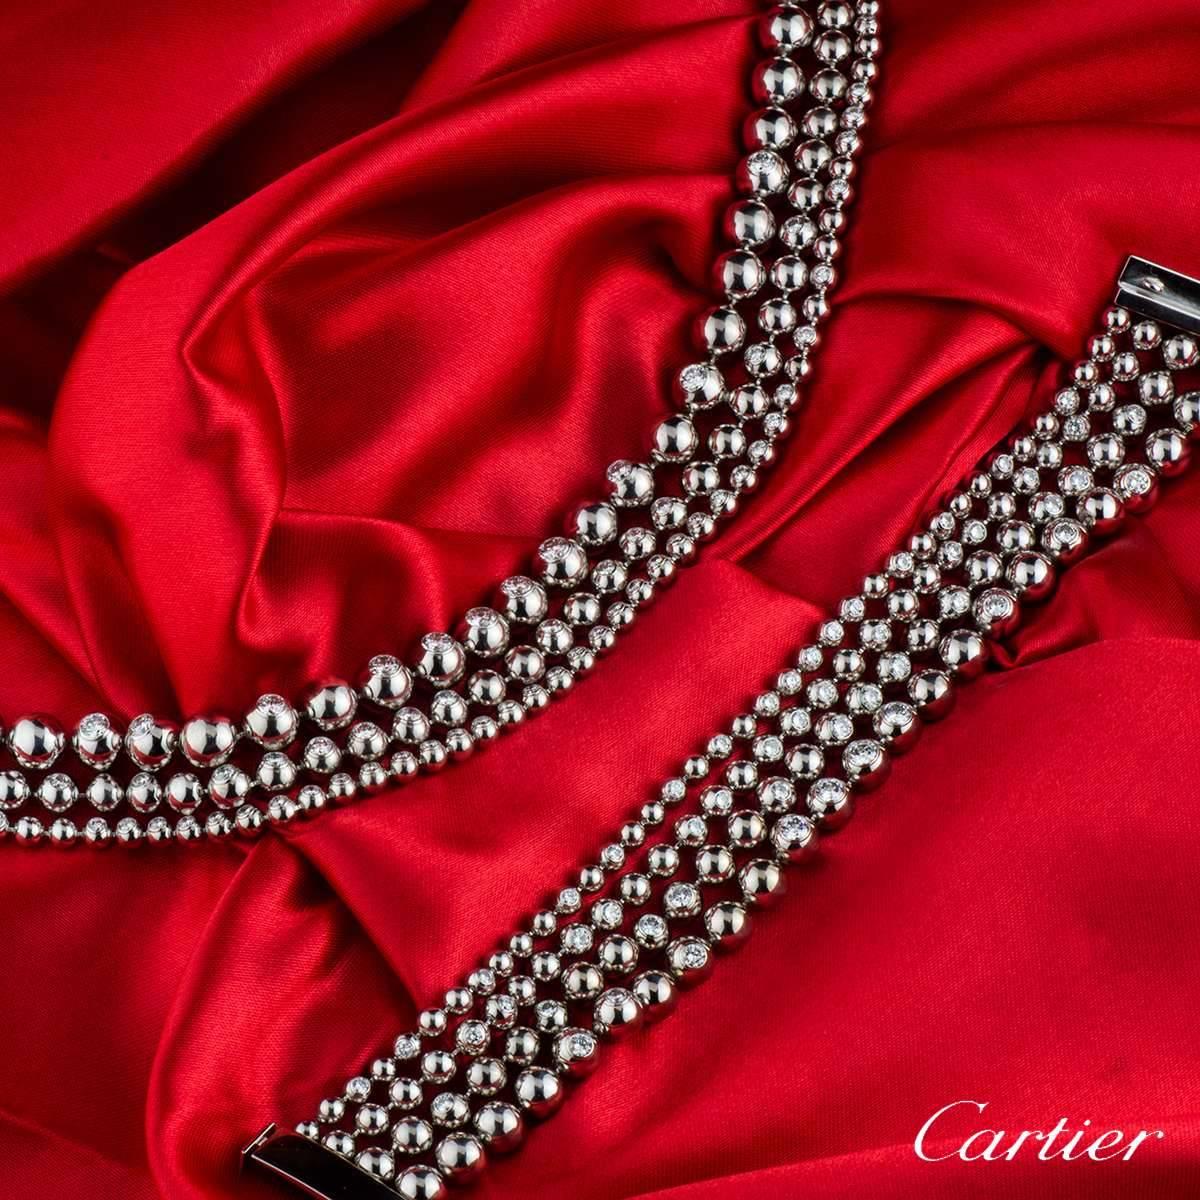 A luxurious 18k white gold Cartier diamond jewellery suite from the Moonlight collection. The jewellery consists of a necklace and bracelet. The necklace comprises of 3 strands featuring 196 circular ball motifs assymetrically set round brilliant